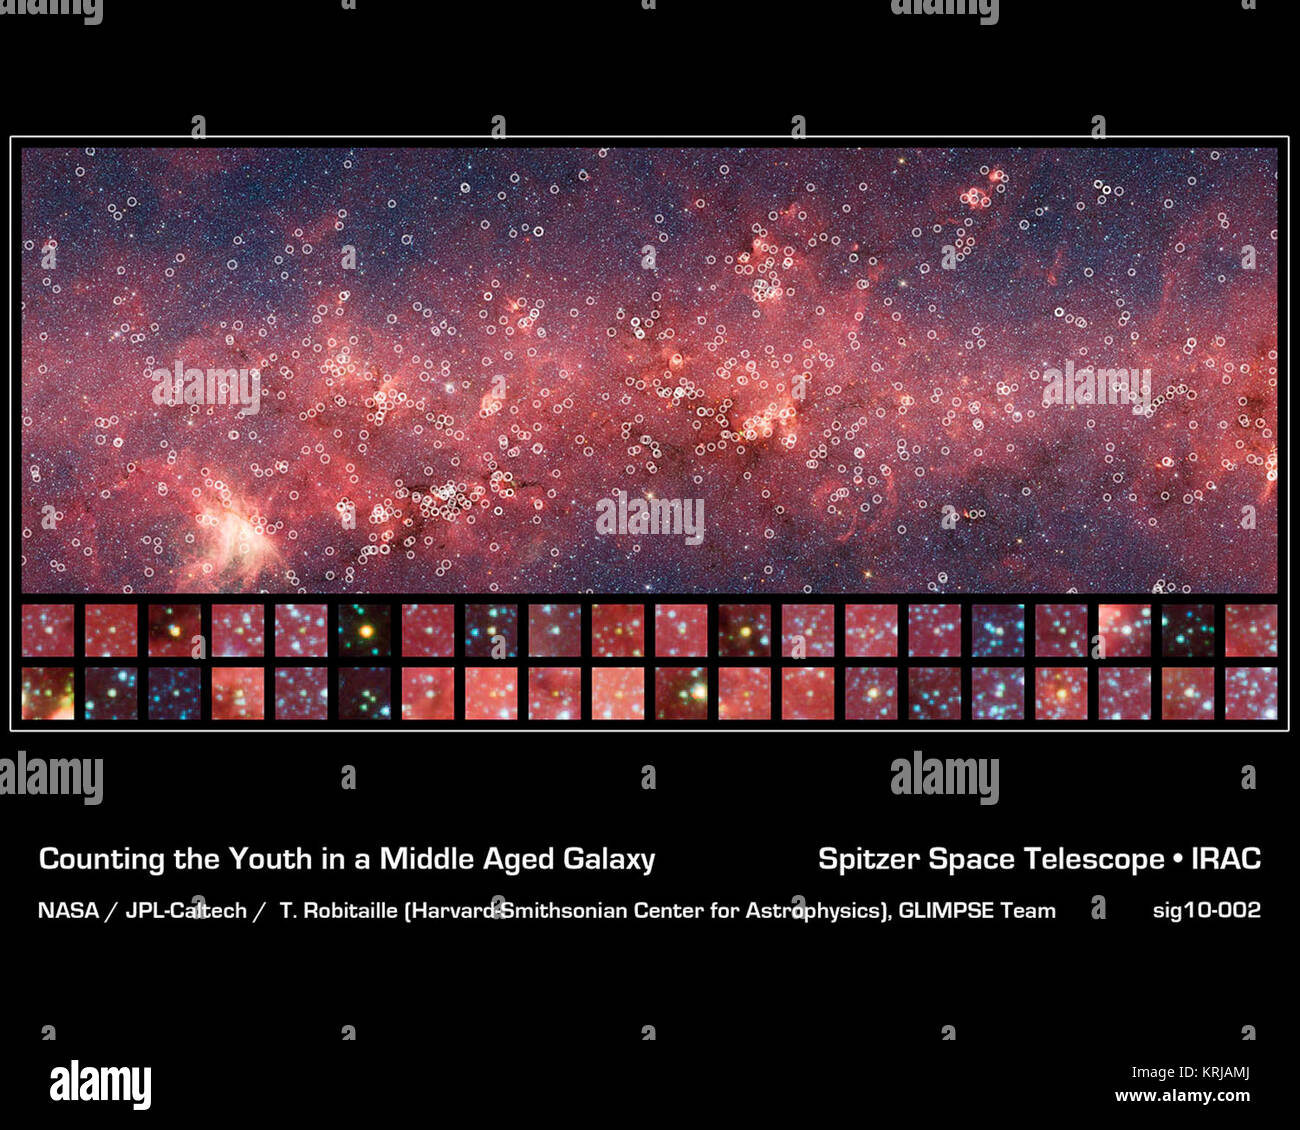 This image is roughly 1/34 of the entire GLIMPSE Survey. This small section is riddled with young stellar objects, counted by Robitaille and his team. Counting the Youth in a Middle Aged Galaxy Stock Photo